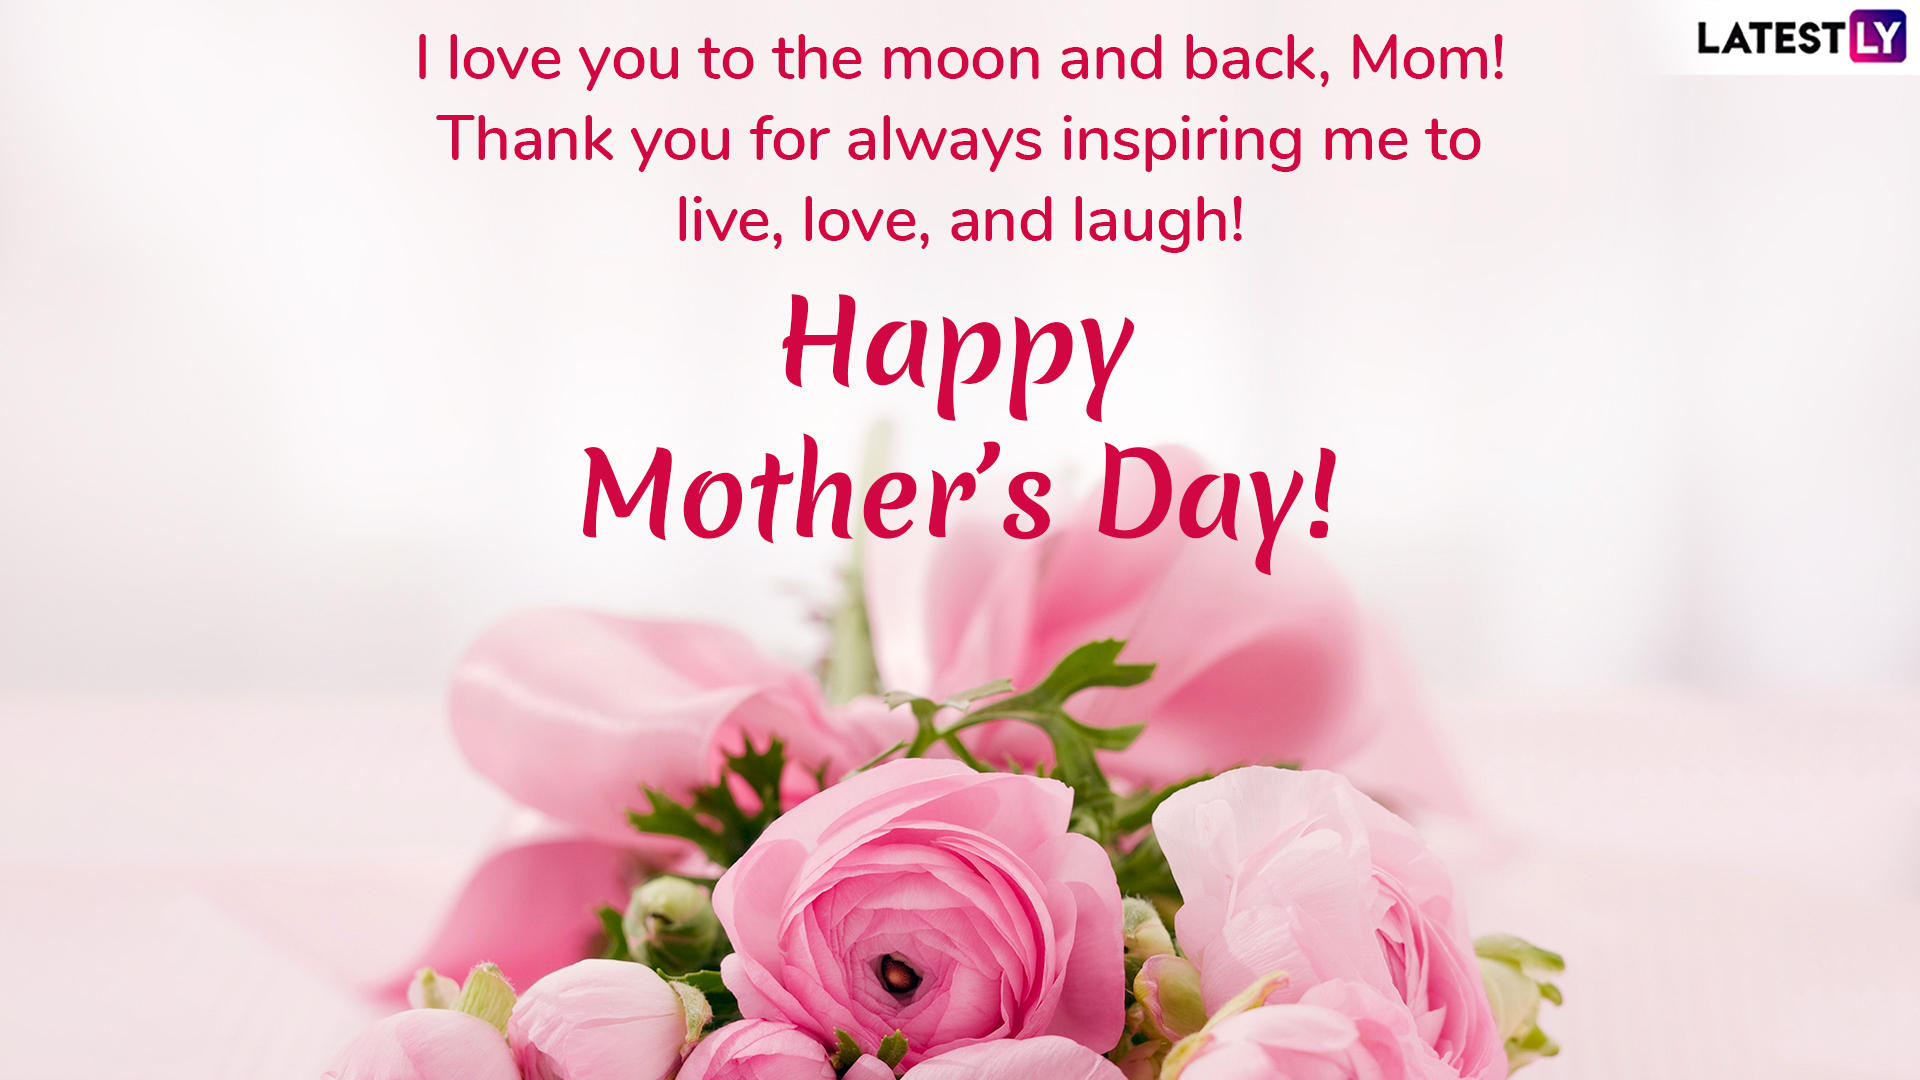 happy-mother-s-day-2019-greeting-cards-send-these-wishes-quotes